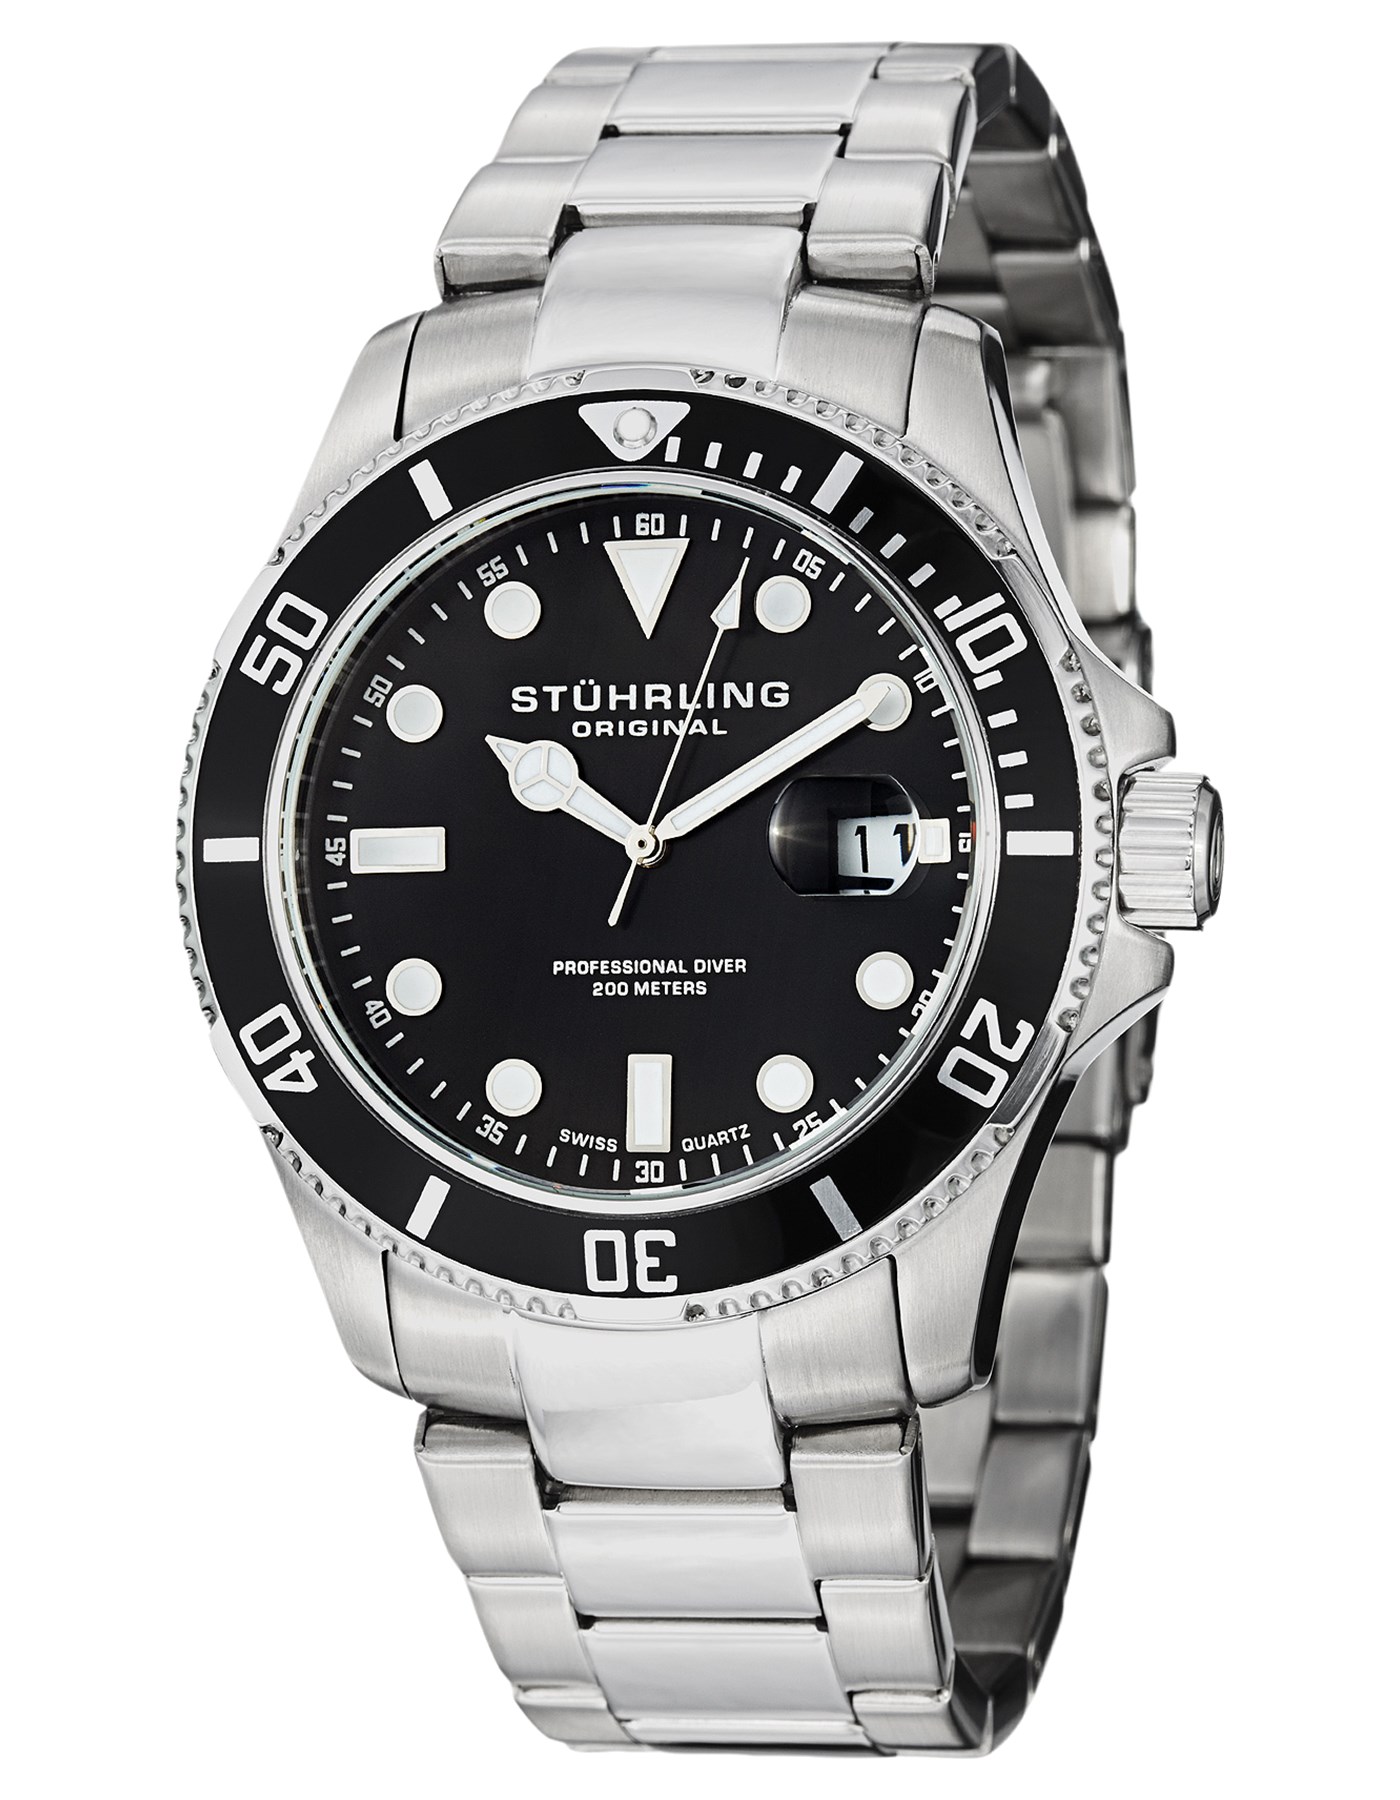 Ultimate Top 33 Best Dive Watches For Men 2019 The Watch Blog